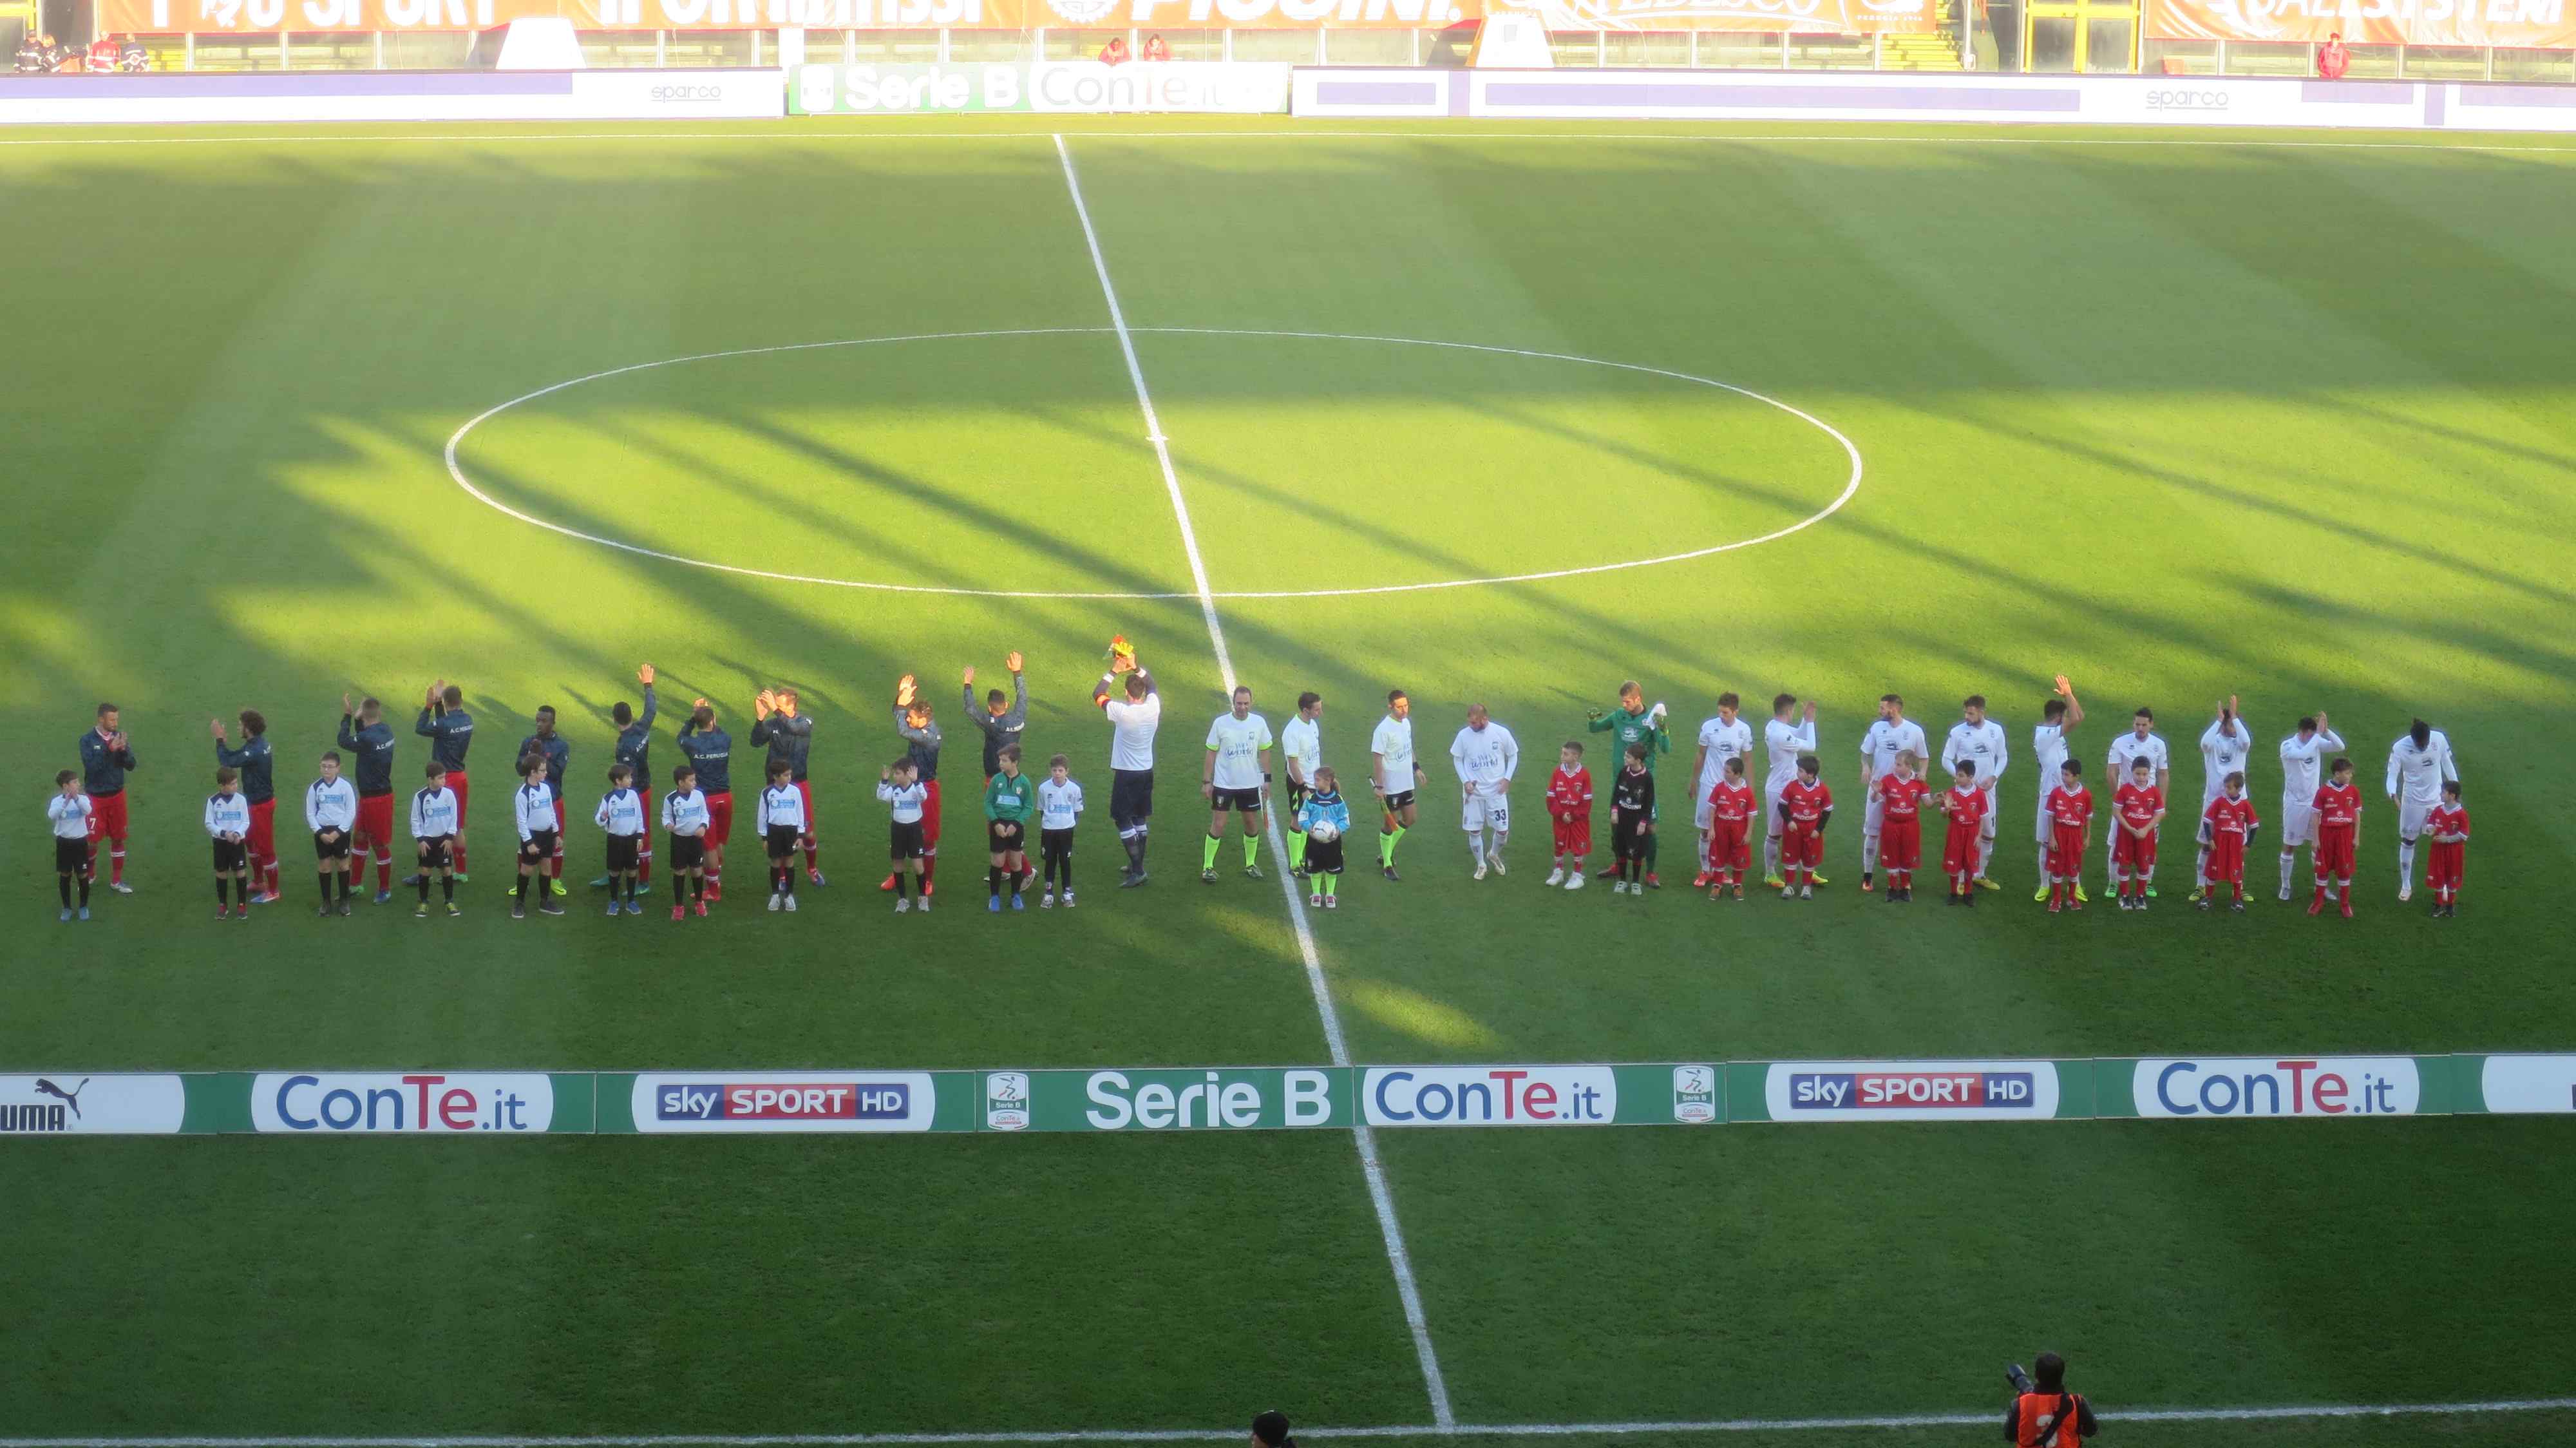 PgProvercelli001